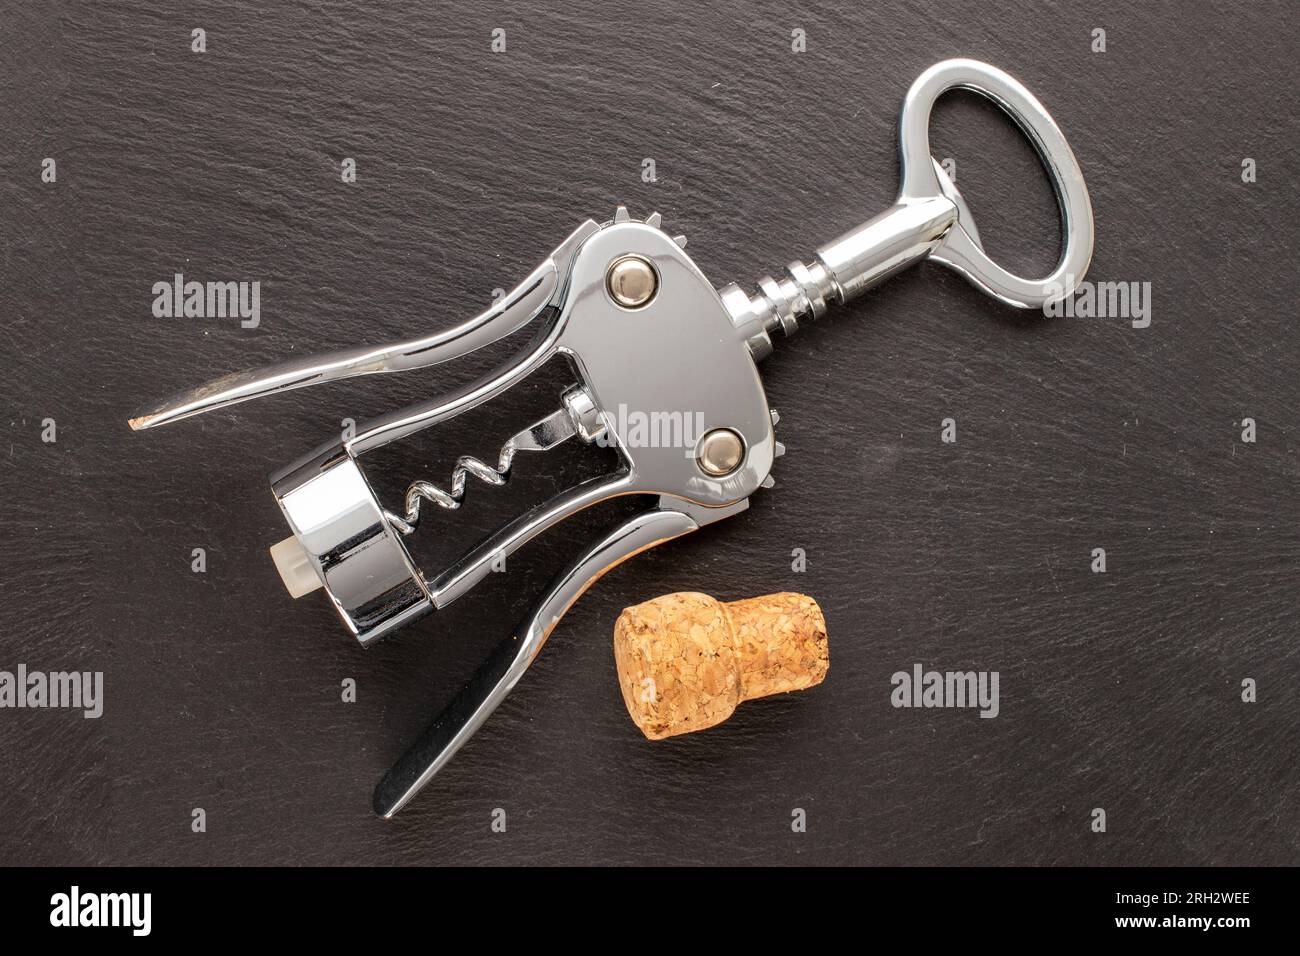 One stainless steel corkscrew with stopper on slate stone, macro, top view. Stock Photo